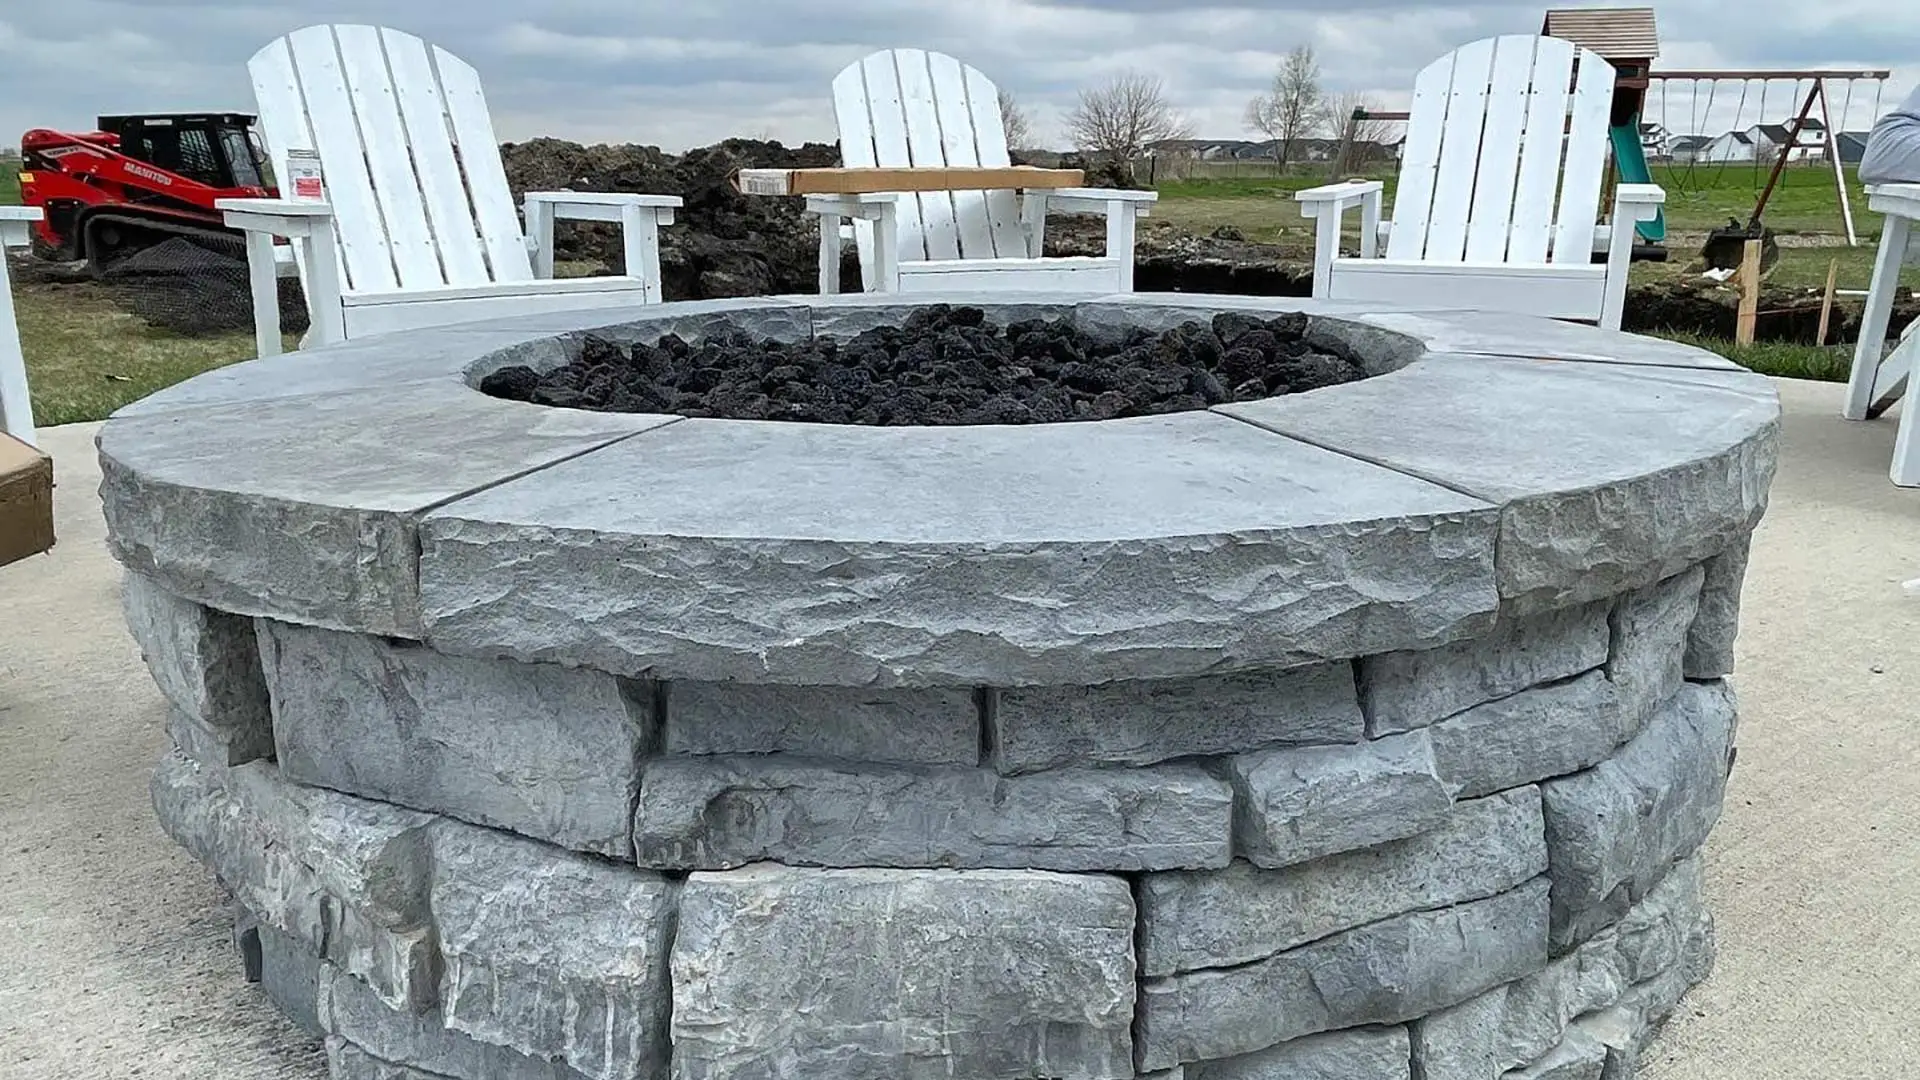 Fire pit installed over a patio in Bondurant, IA.